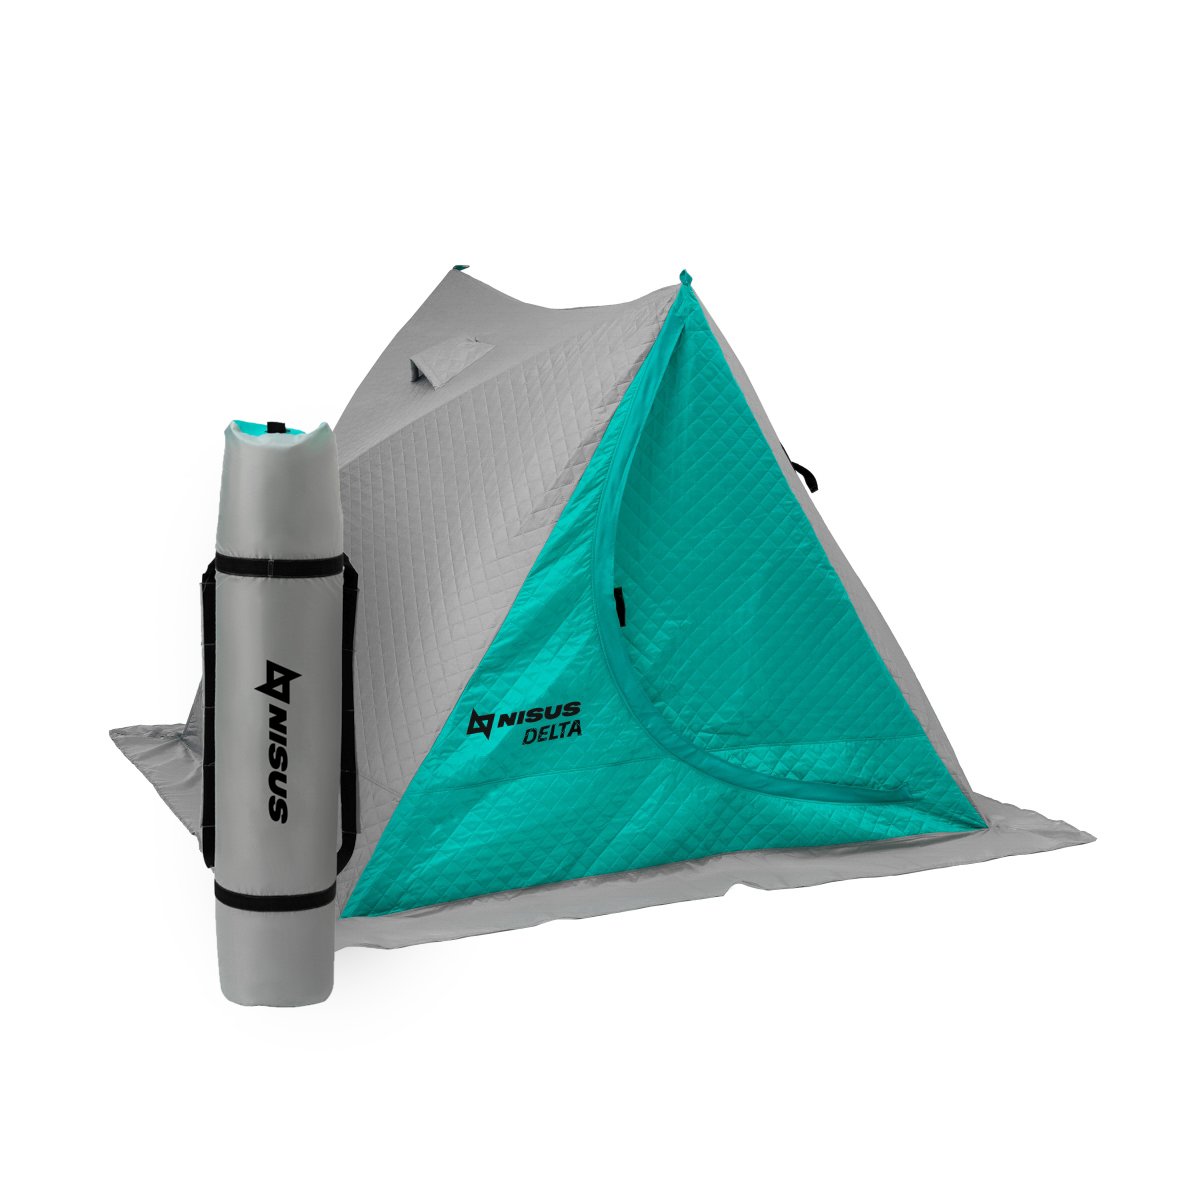 Delta Portable Insulated Ice Fishing Tent Shelter for 2 Persons has a carrying bag attached